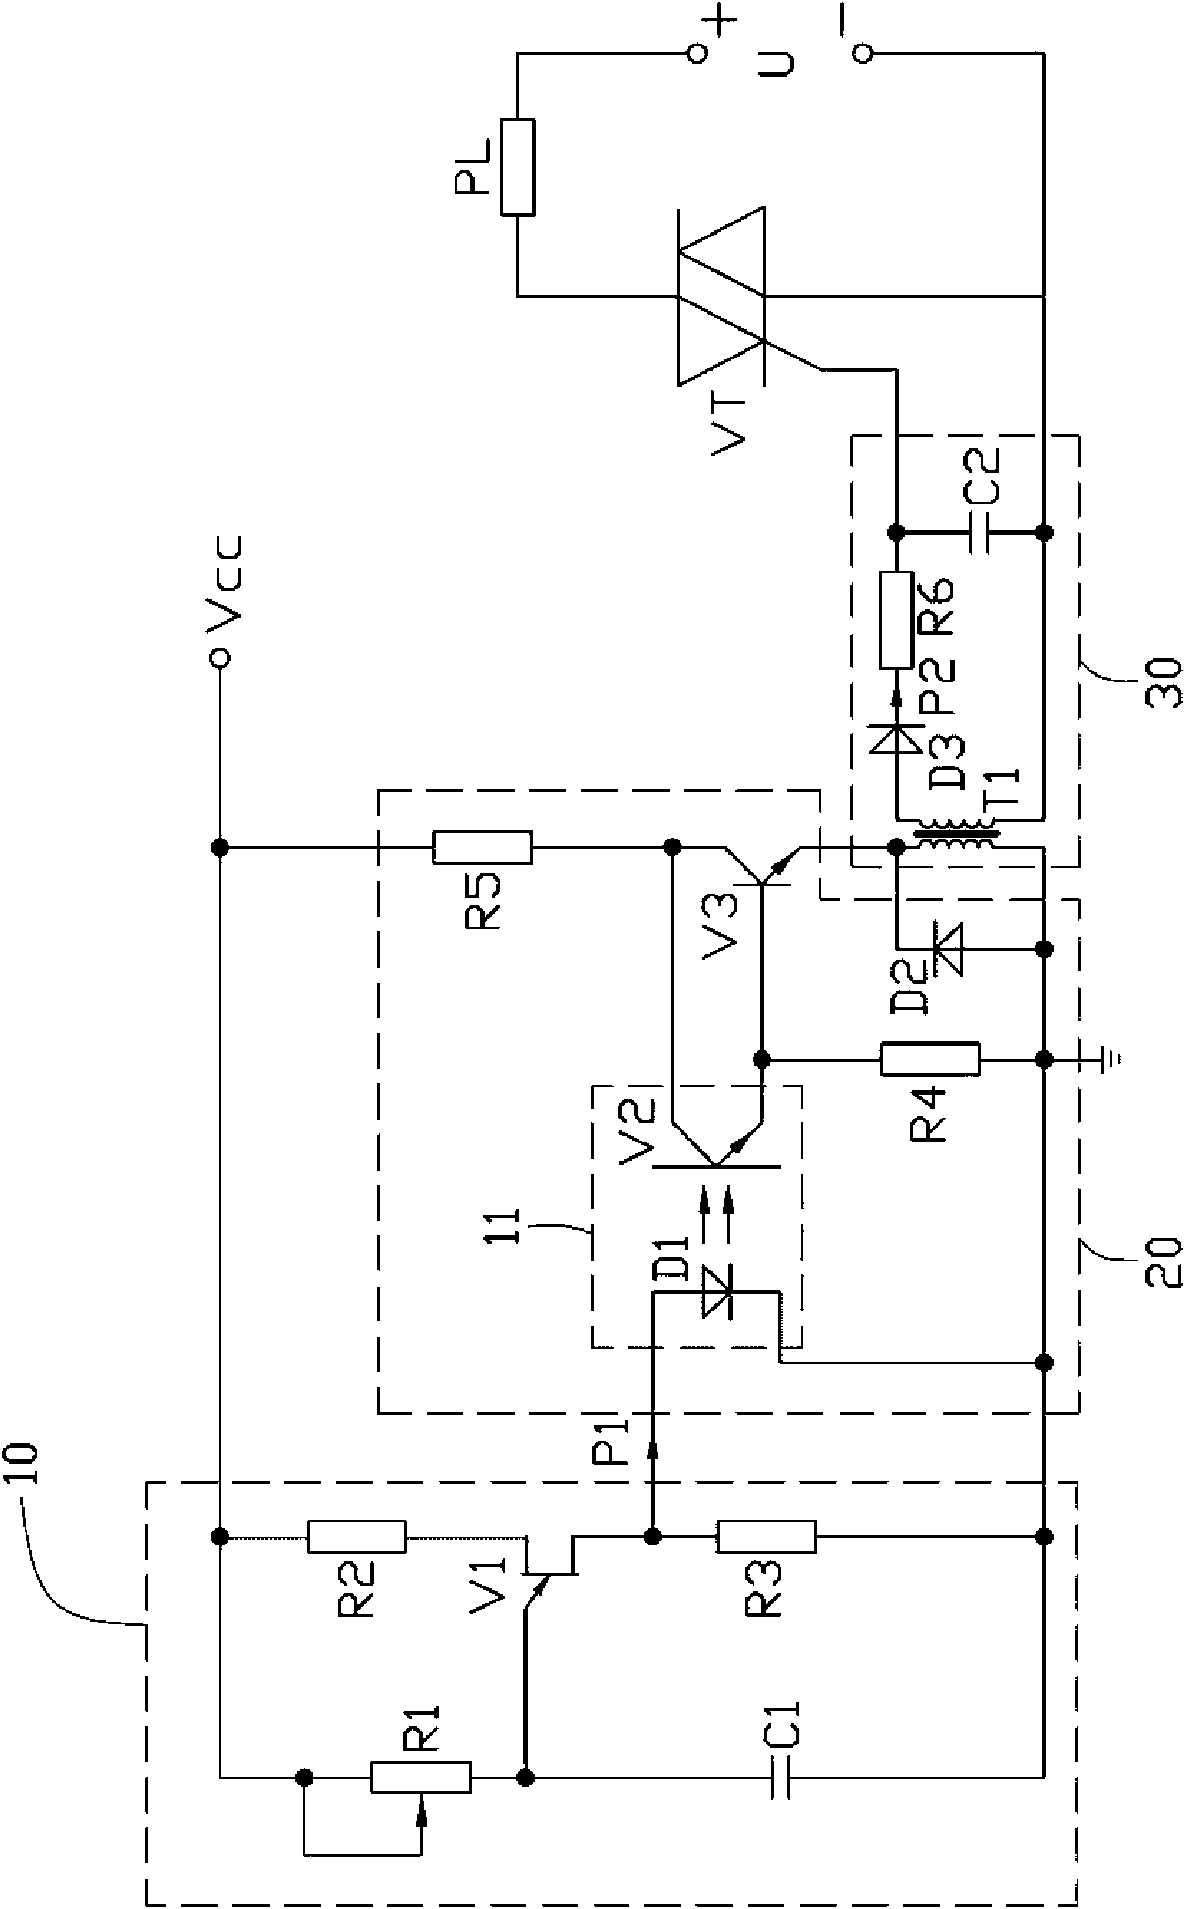 Circuit for regulating and controlling output power of power supply